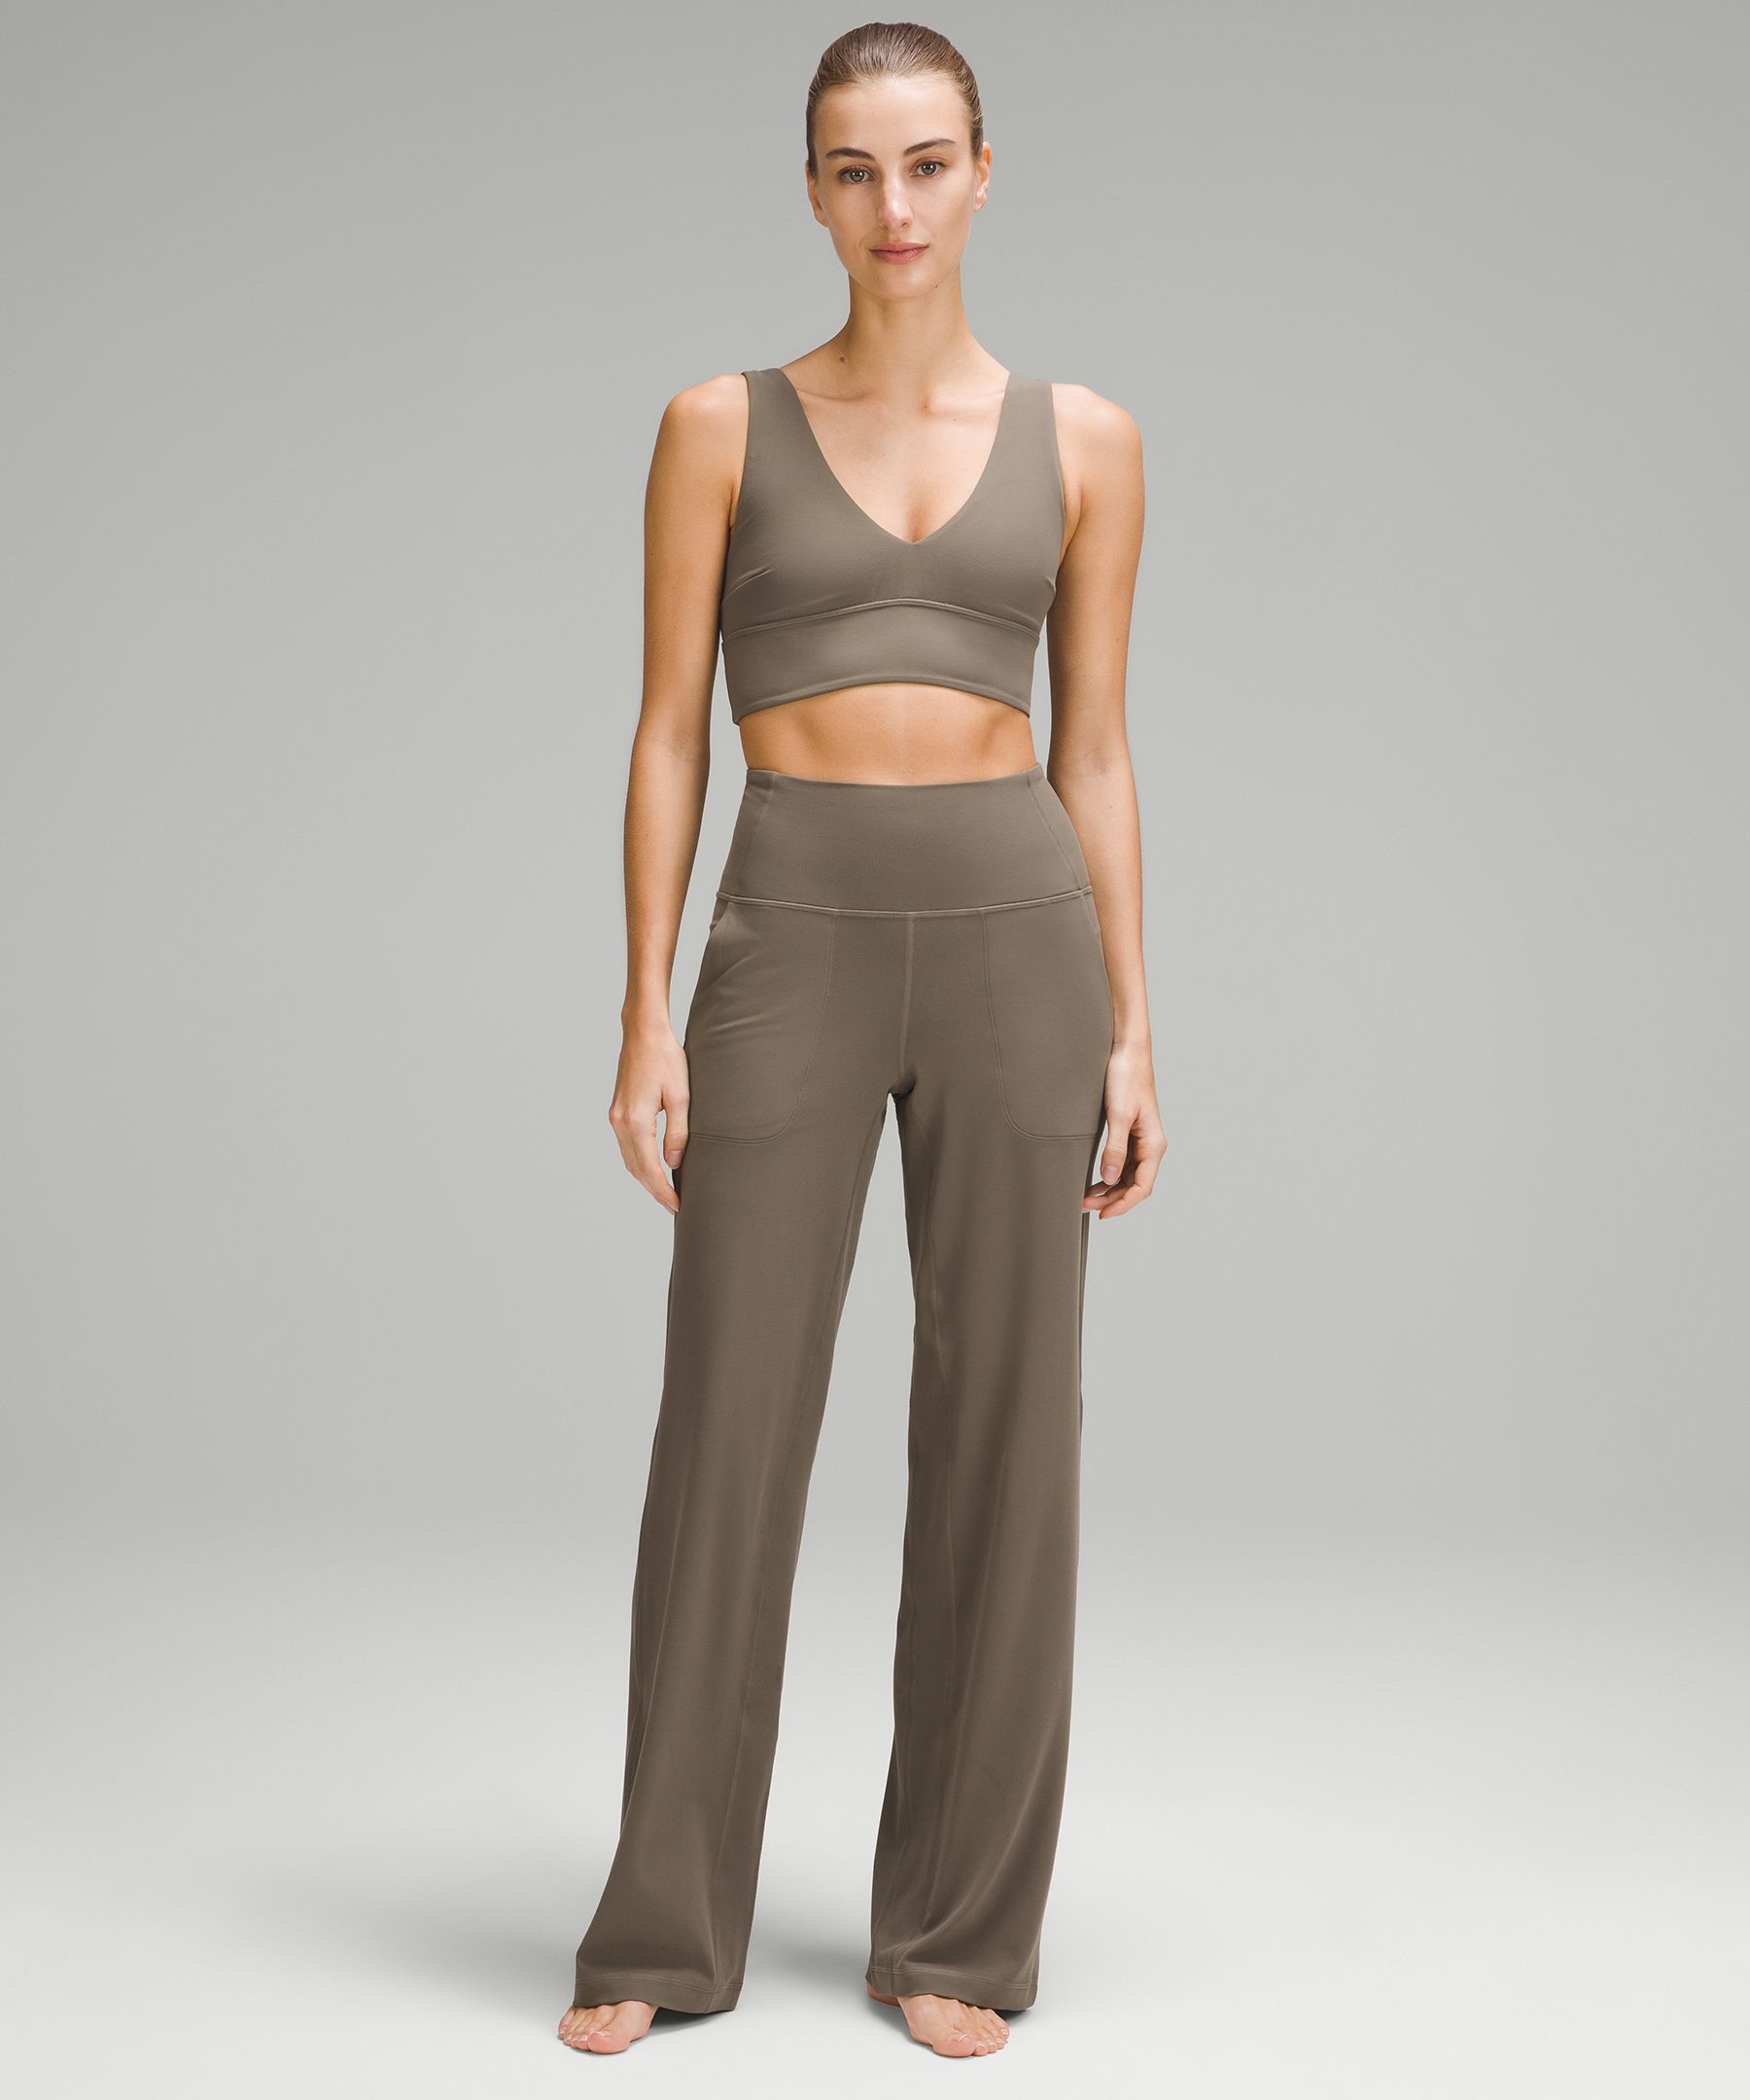 In-Store Try-Ons: Energy LL textured (6) + 21” align pants (4) - deep  fuschia, in alignment bra soft cranberry (6) and adapted state joggers (6,  grey colour, not sure of the name)